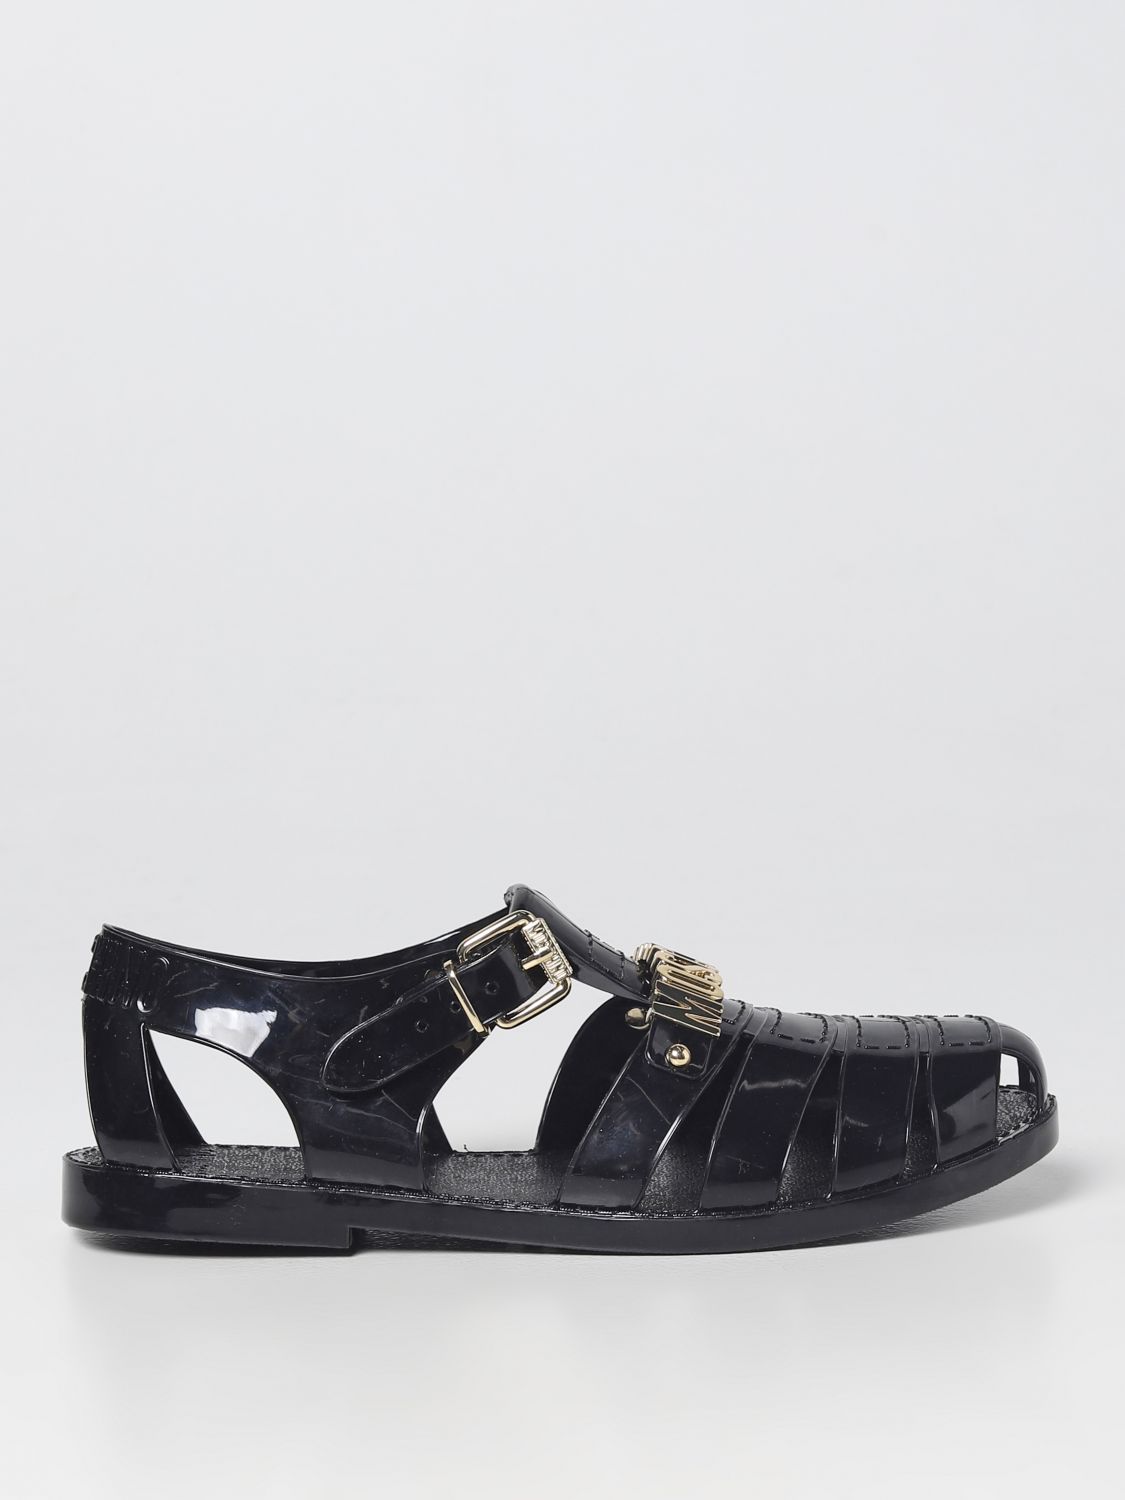 MOSCHINO COUTURE: sandals for man - Black | Moschino Couture sandals ...